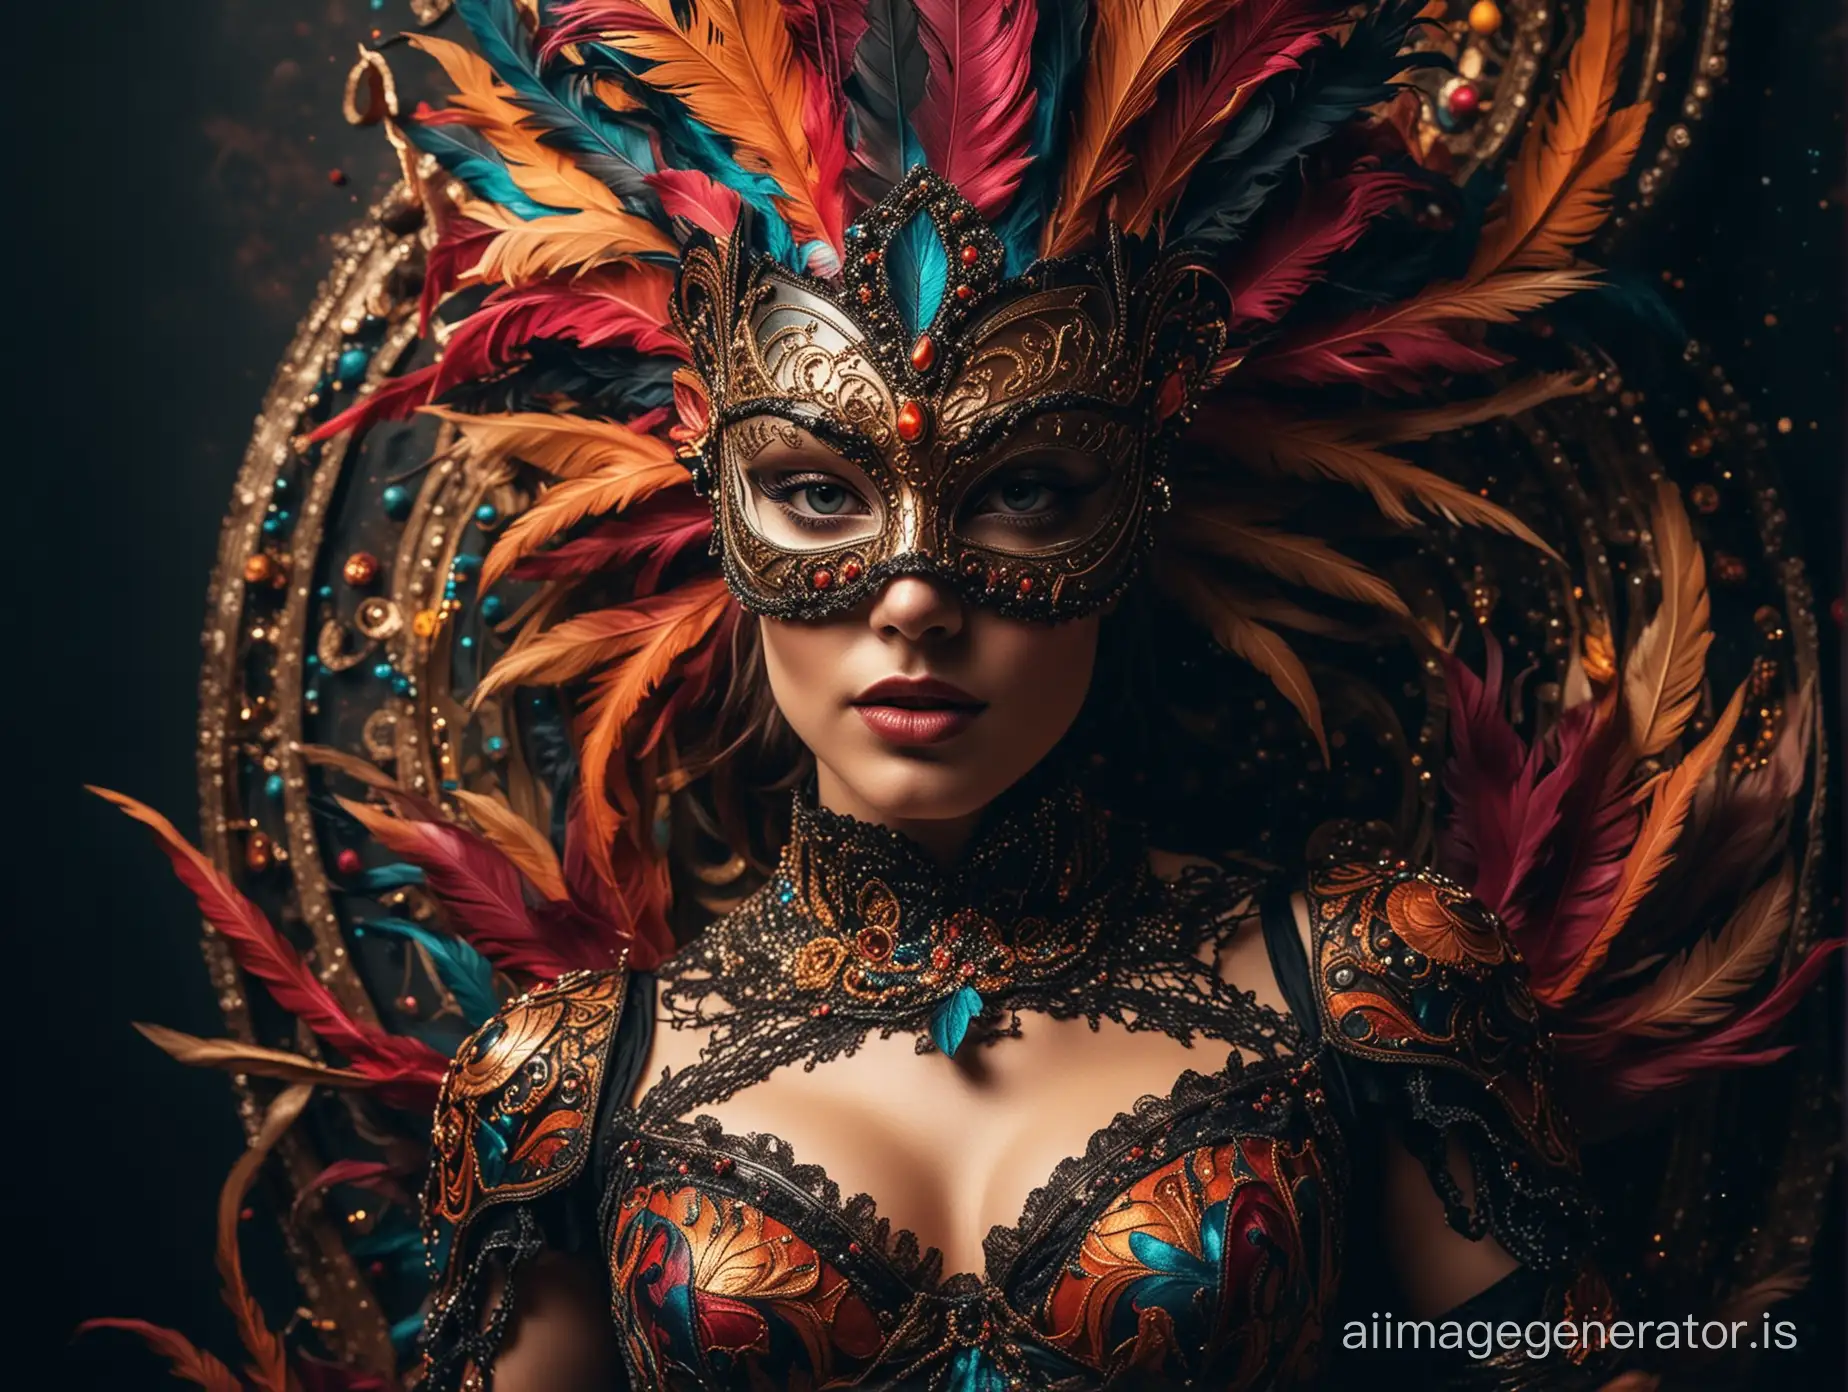 top view. wide view A striking image of a woman dressed in a luxurious masquerade costume, with The jet design is intricately layered onto her bodysuit, adding a dramatic touch to the masquerade theme. The background is filled with the vibrant colors and low lights of a masquerade ball.